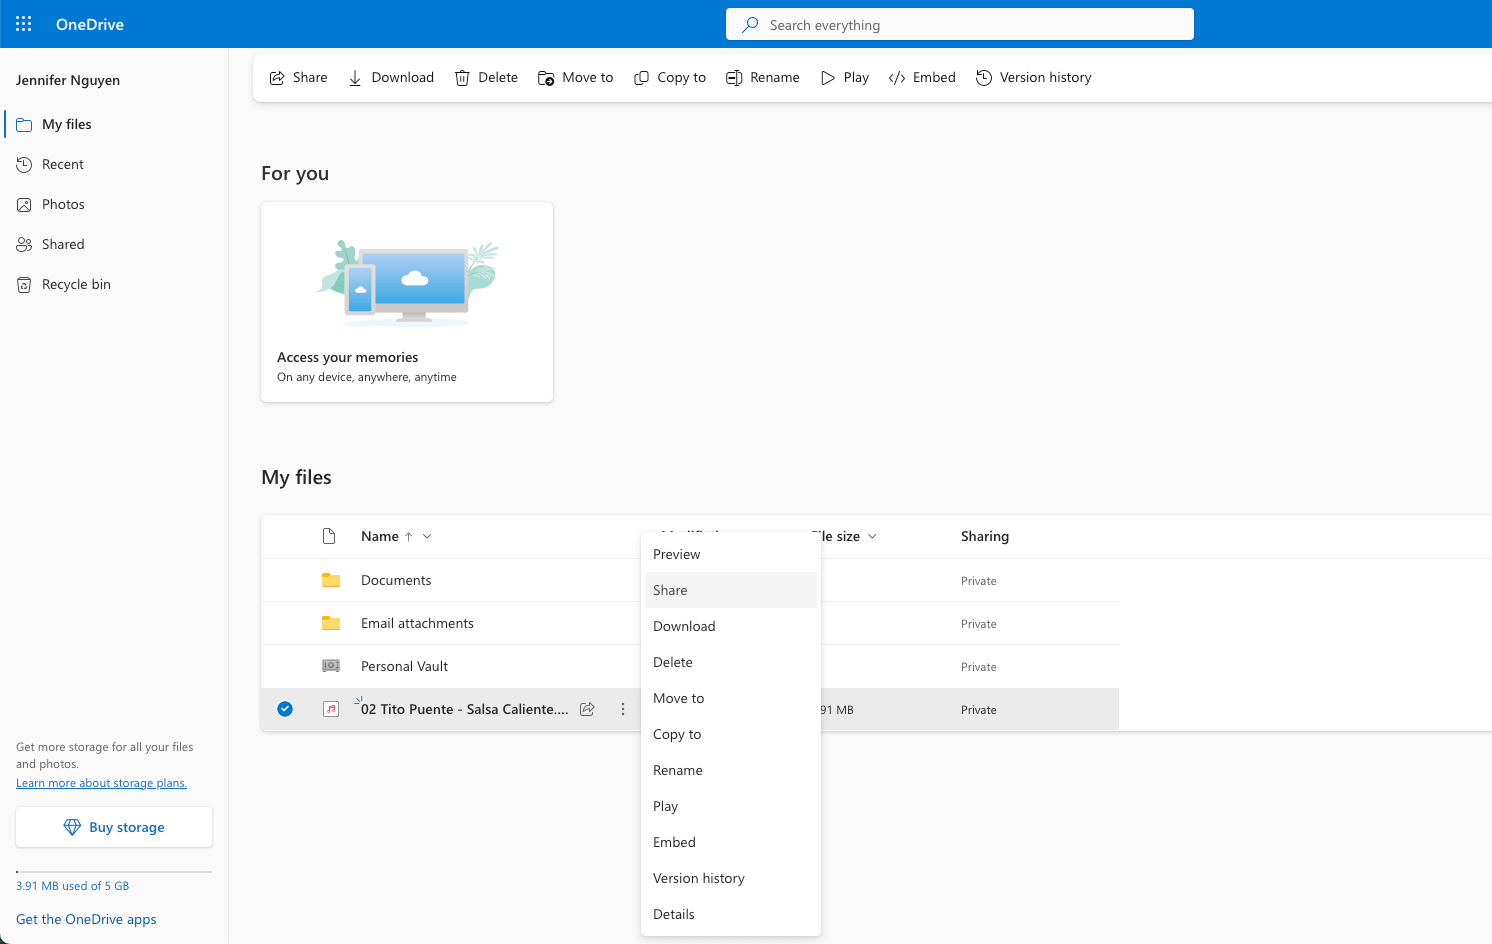 Sharing the file with OneDrive